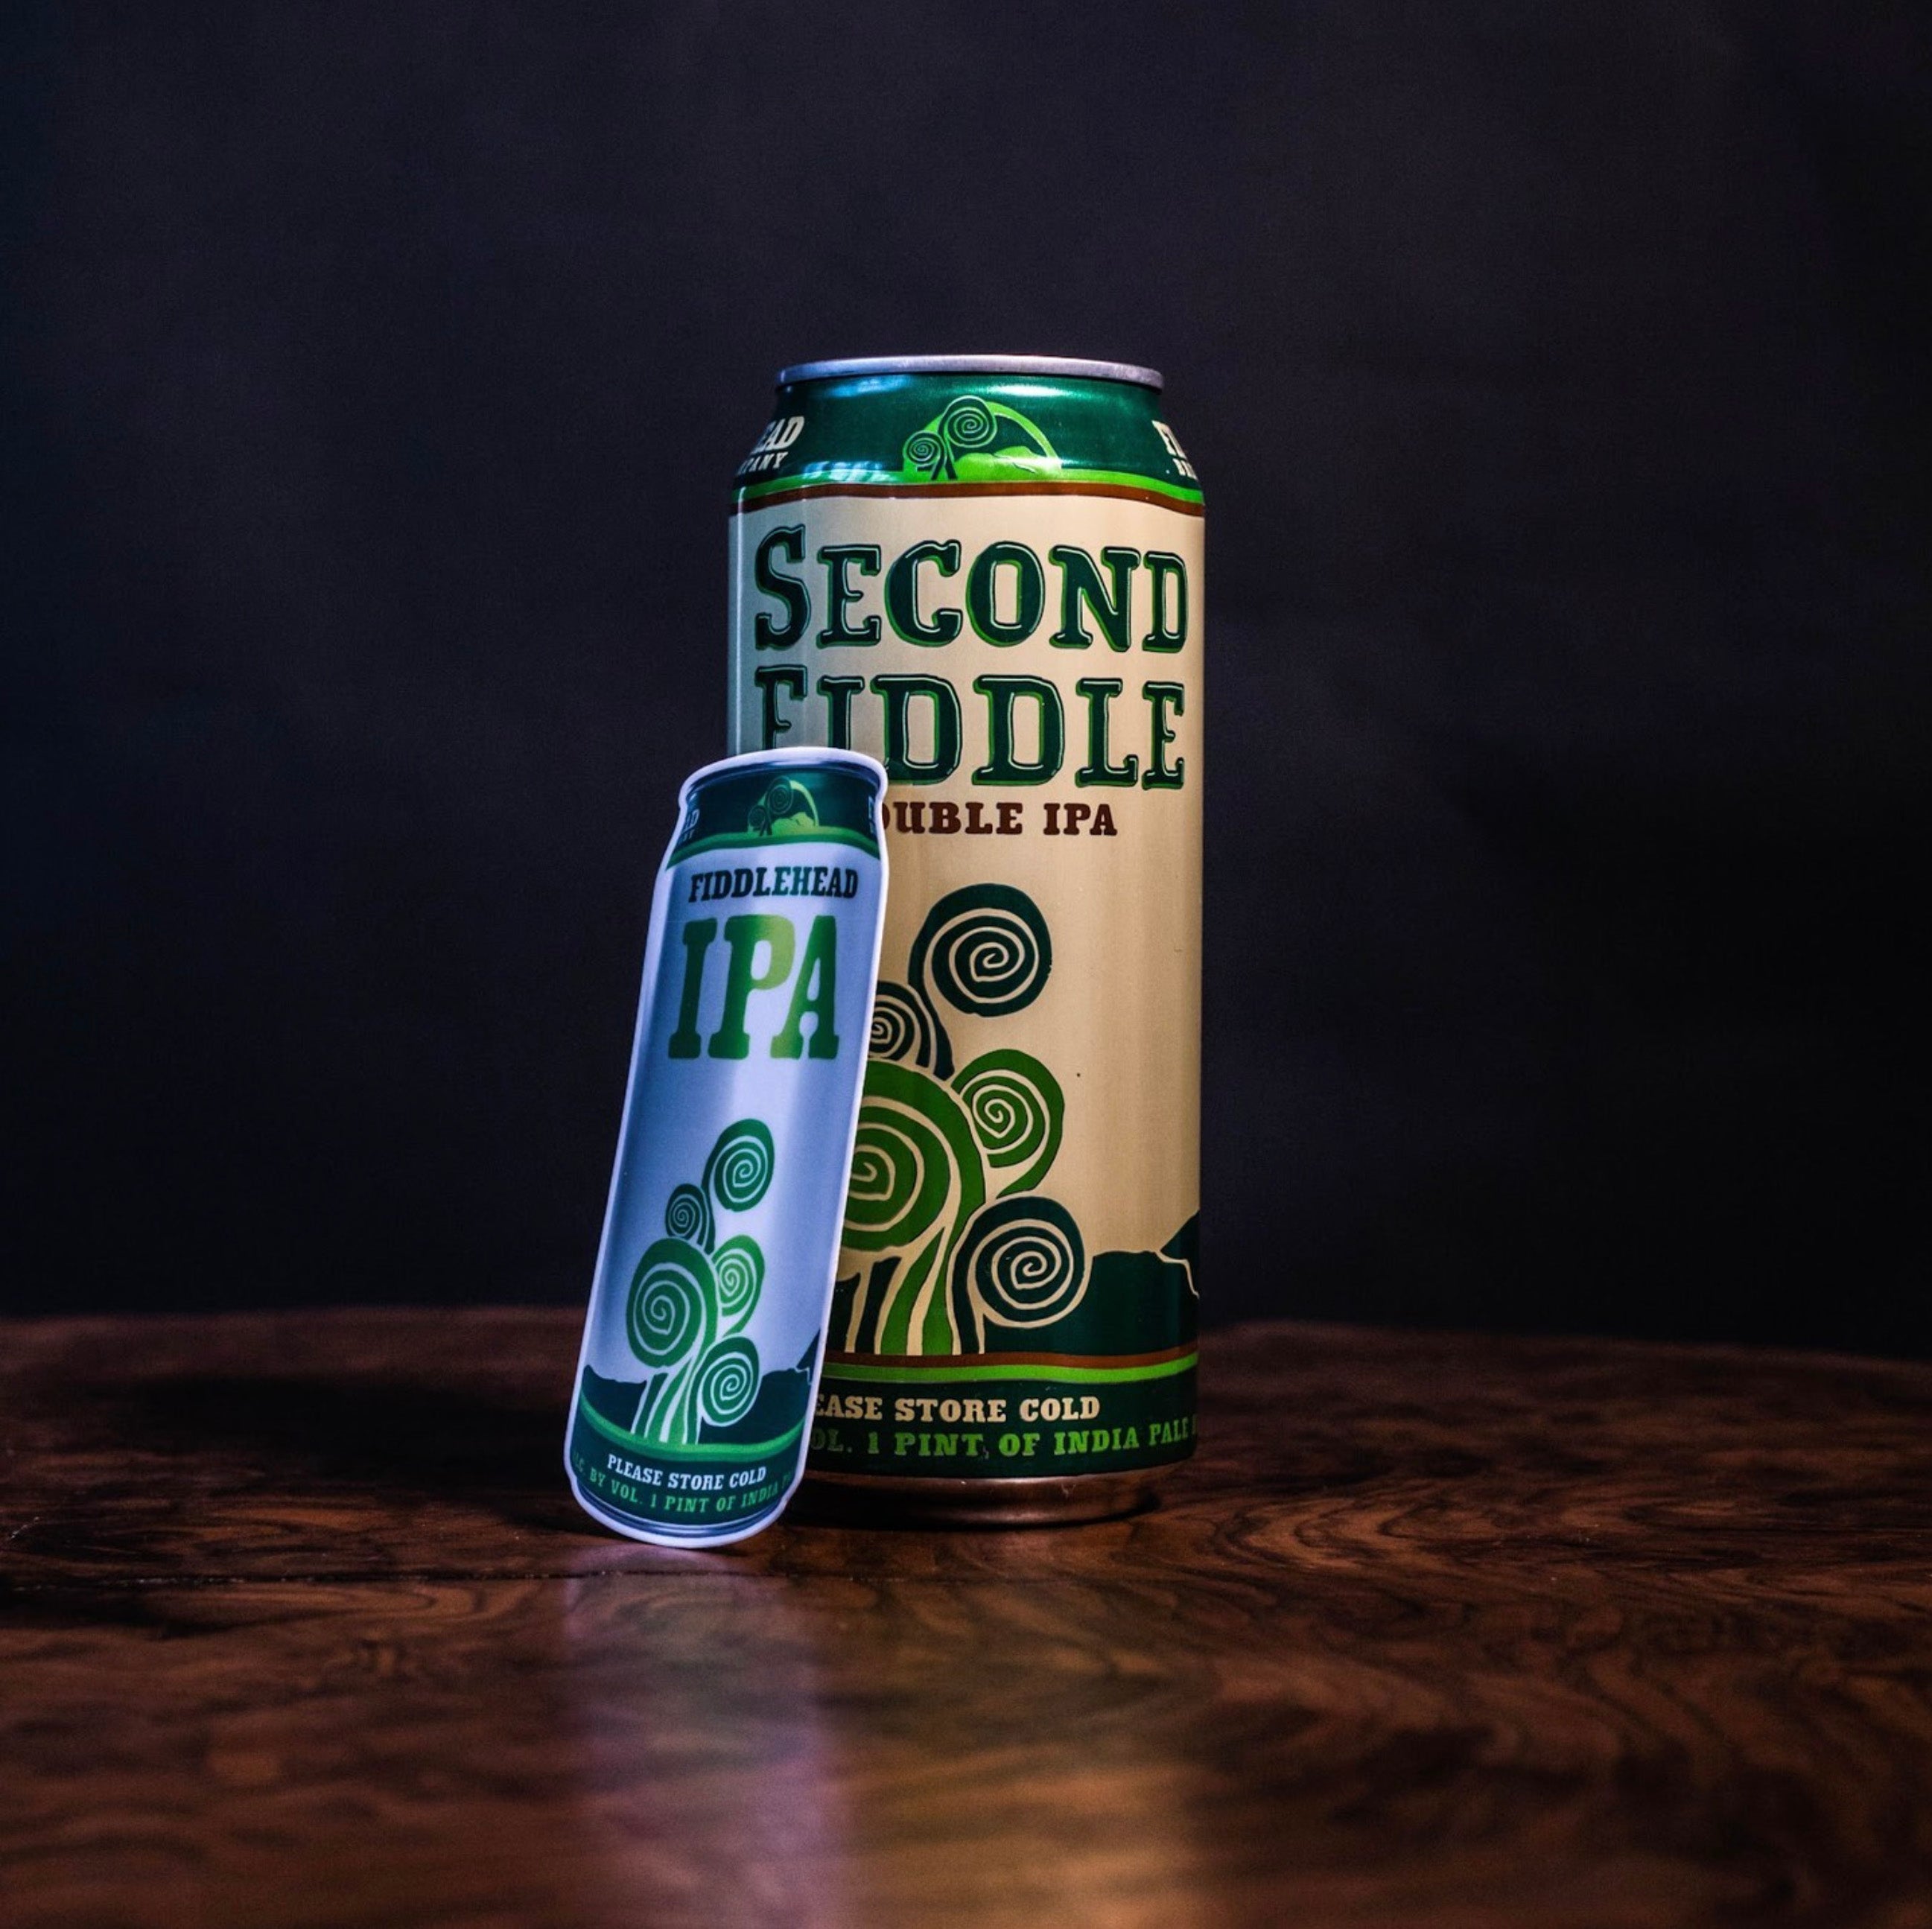 Fiddlehead IPA brewery sticker next to a can of Second Fiddle Double IPA